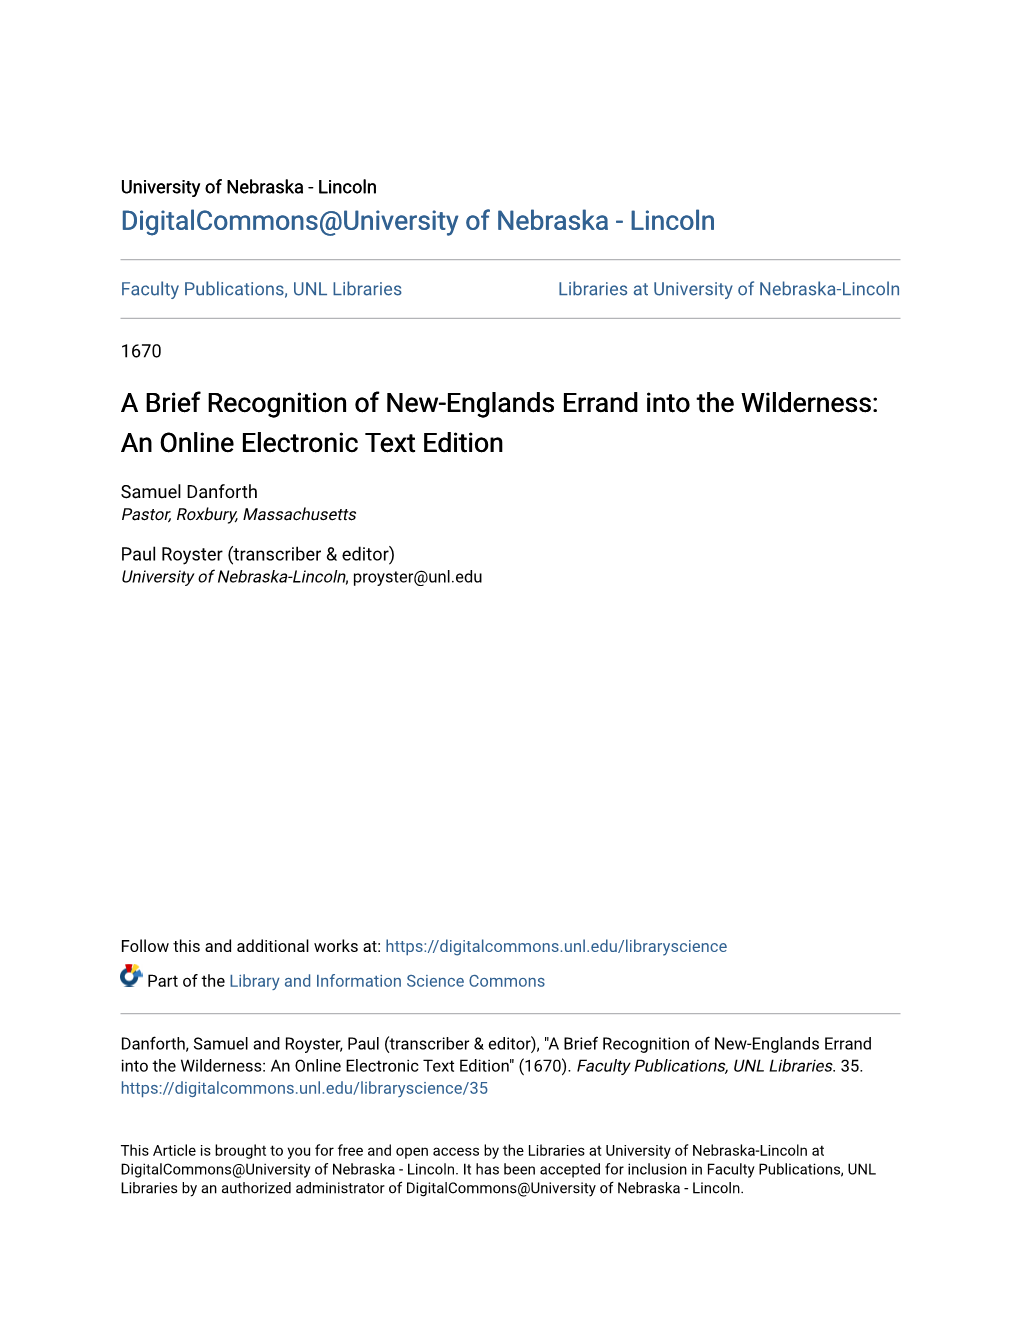 A Brief Recognition of New-Englands Errand Into the Wilderness: an Online Electronic Text Edition